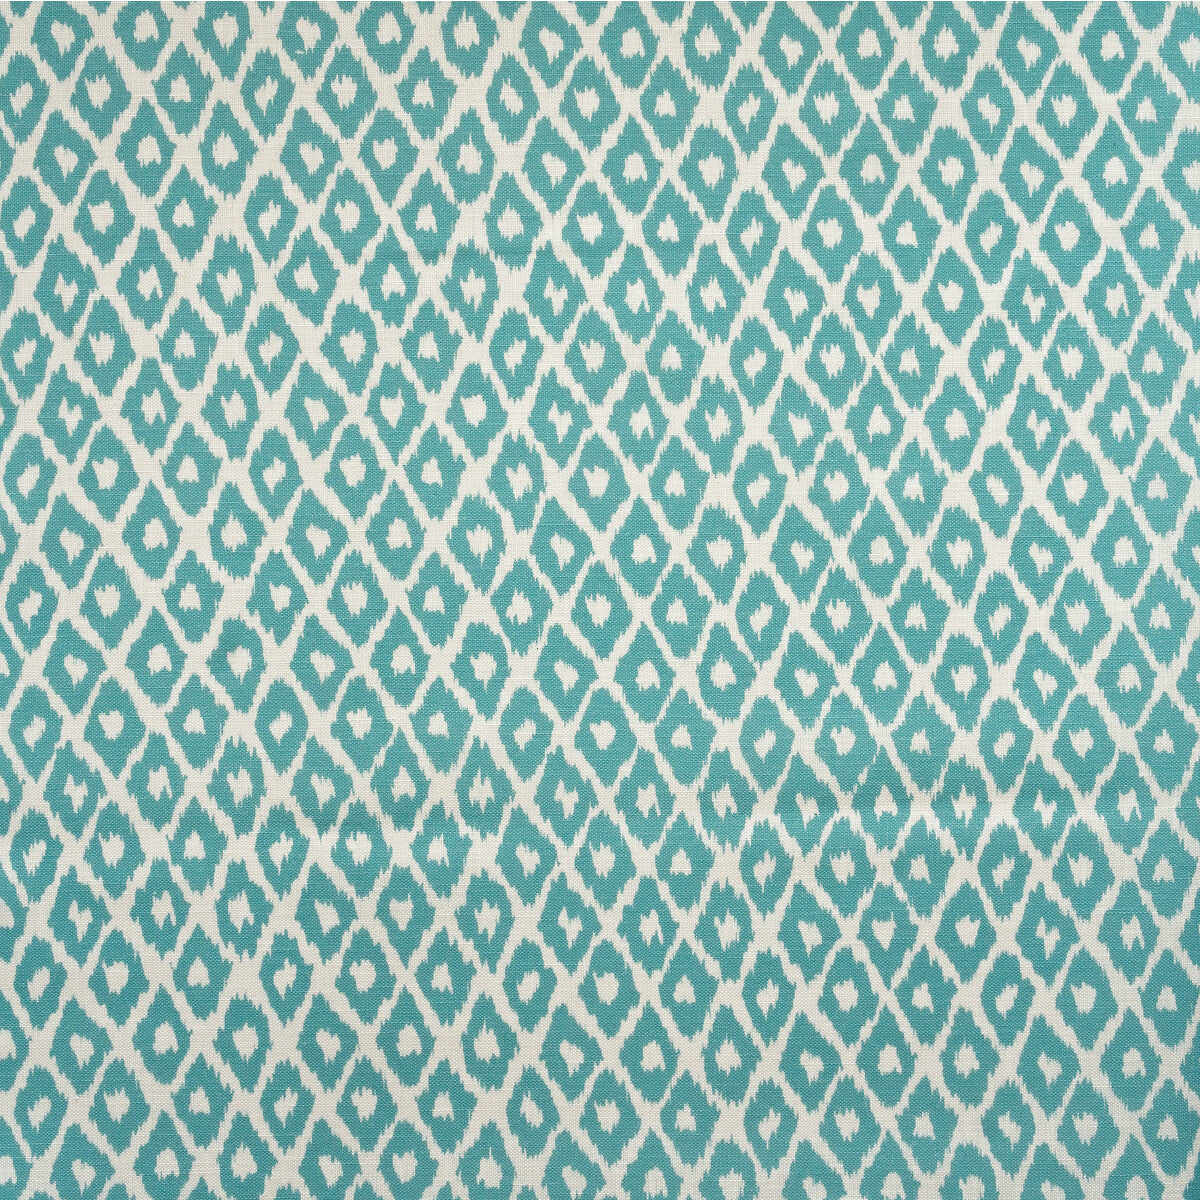 Gypsum Outdoor fabric in lagoon color - pattern AM100349.13.0 - by Kravet Couture in the Andrew Martin The Great Outdoors collection